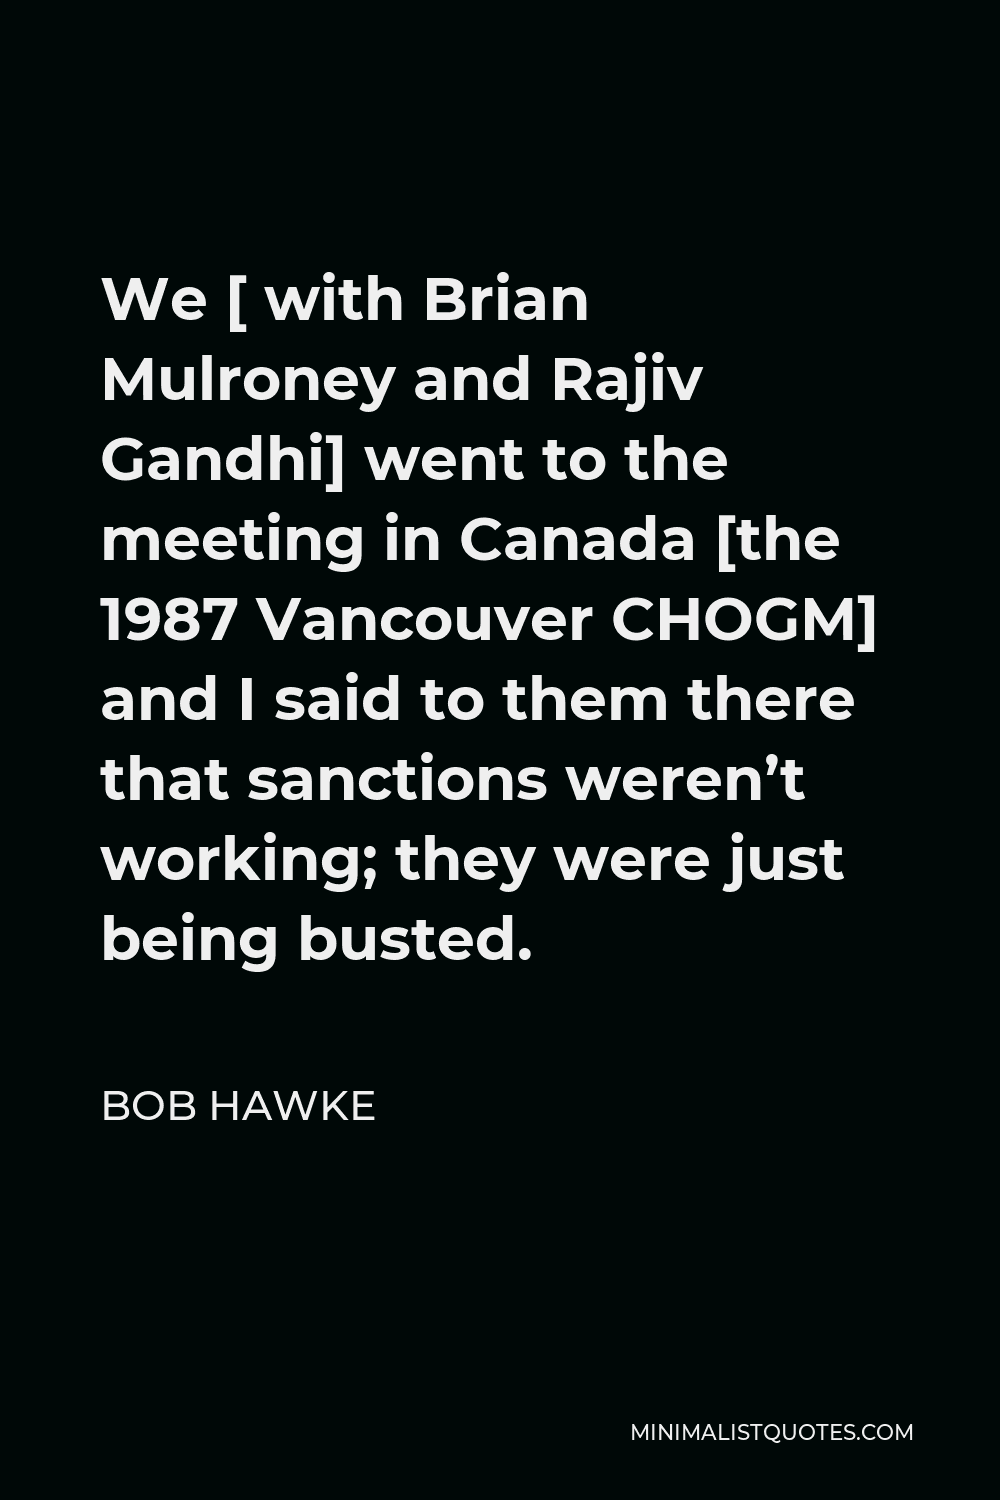 Bob Hawke Quote - We [ with Brian Mulroney and Rajiv Gandhi] went to the meeting in Canada [the 1987 Vancouver CHOGM] and I said to them there that sanctions weren’t working; they were just being busted.